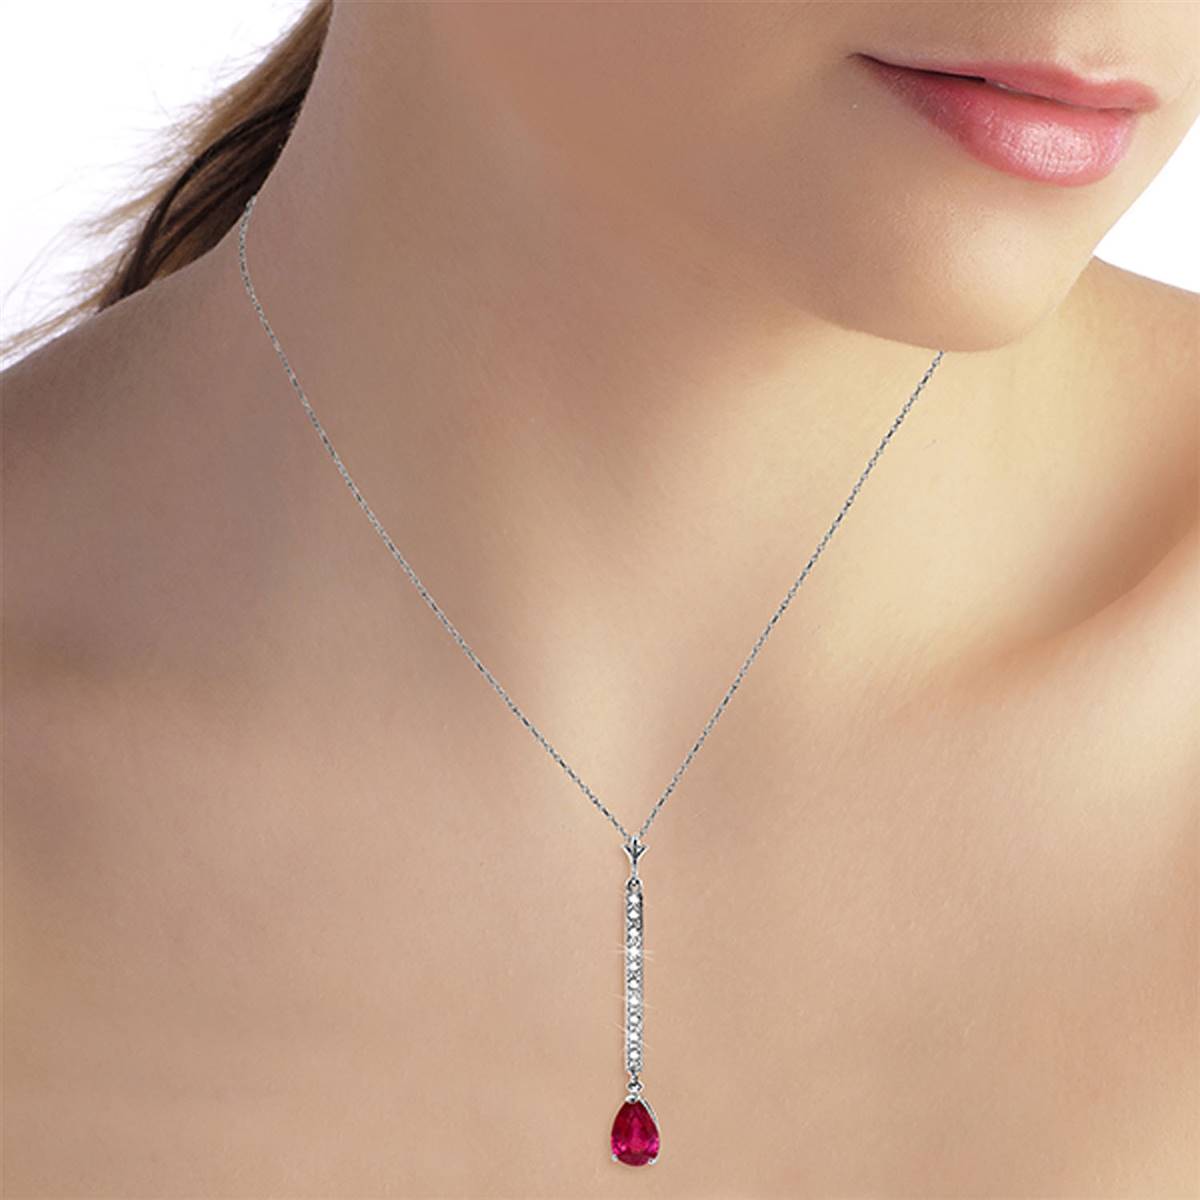 1.8 Carat 14K Solid White Gold Necklace Diamond Ruby